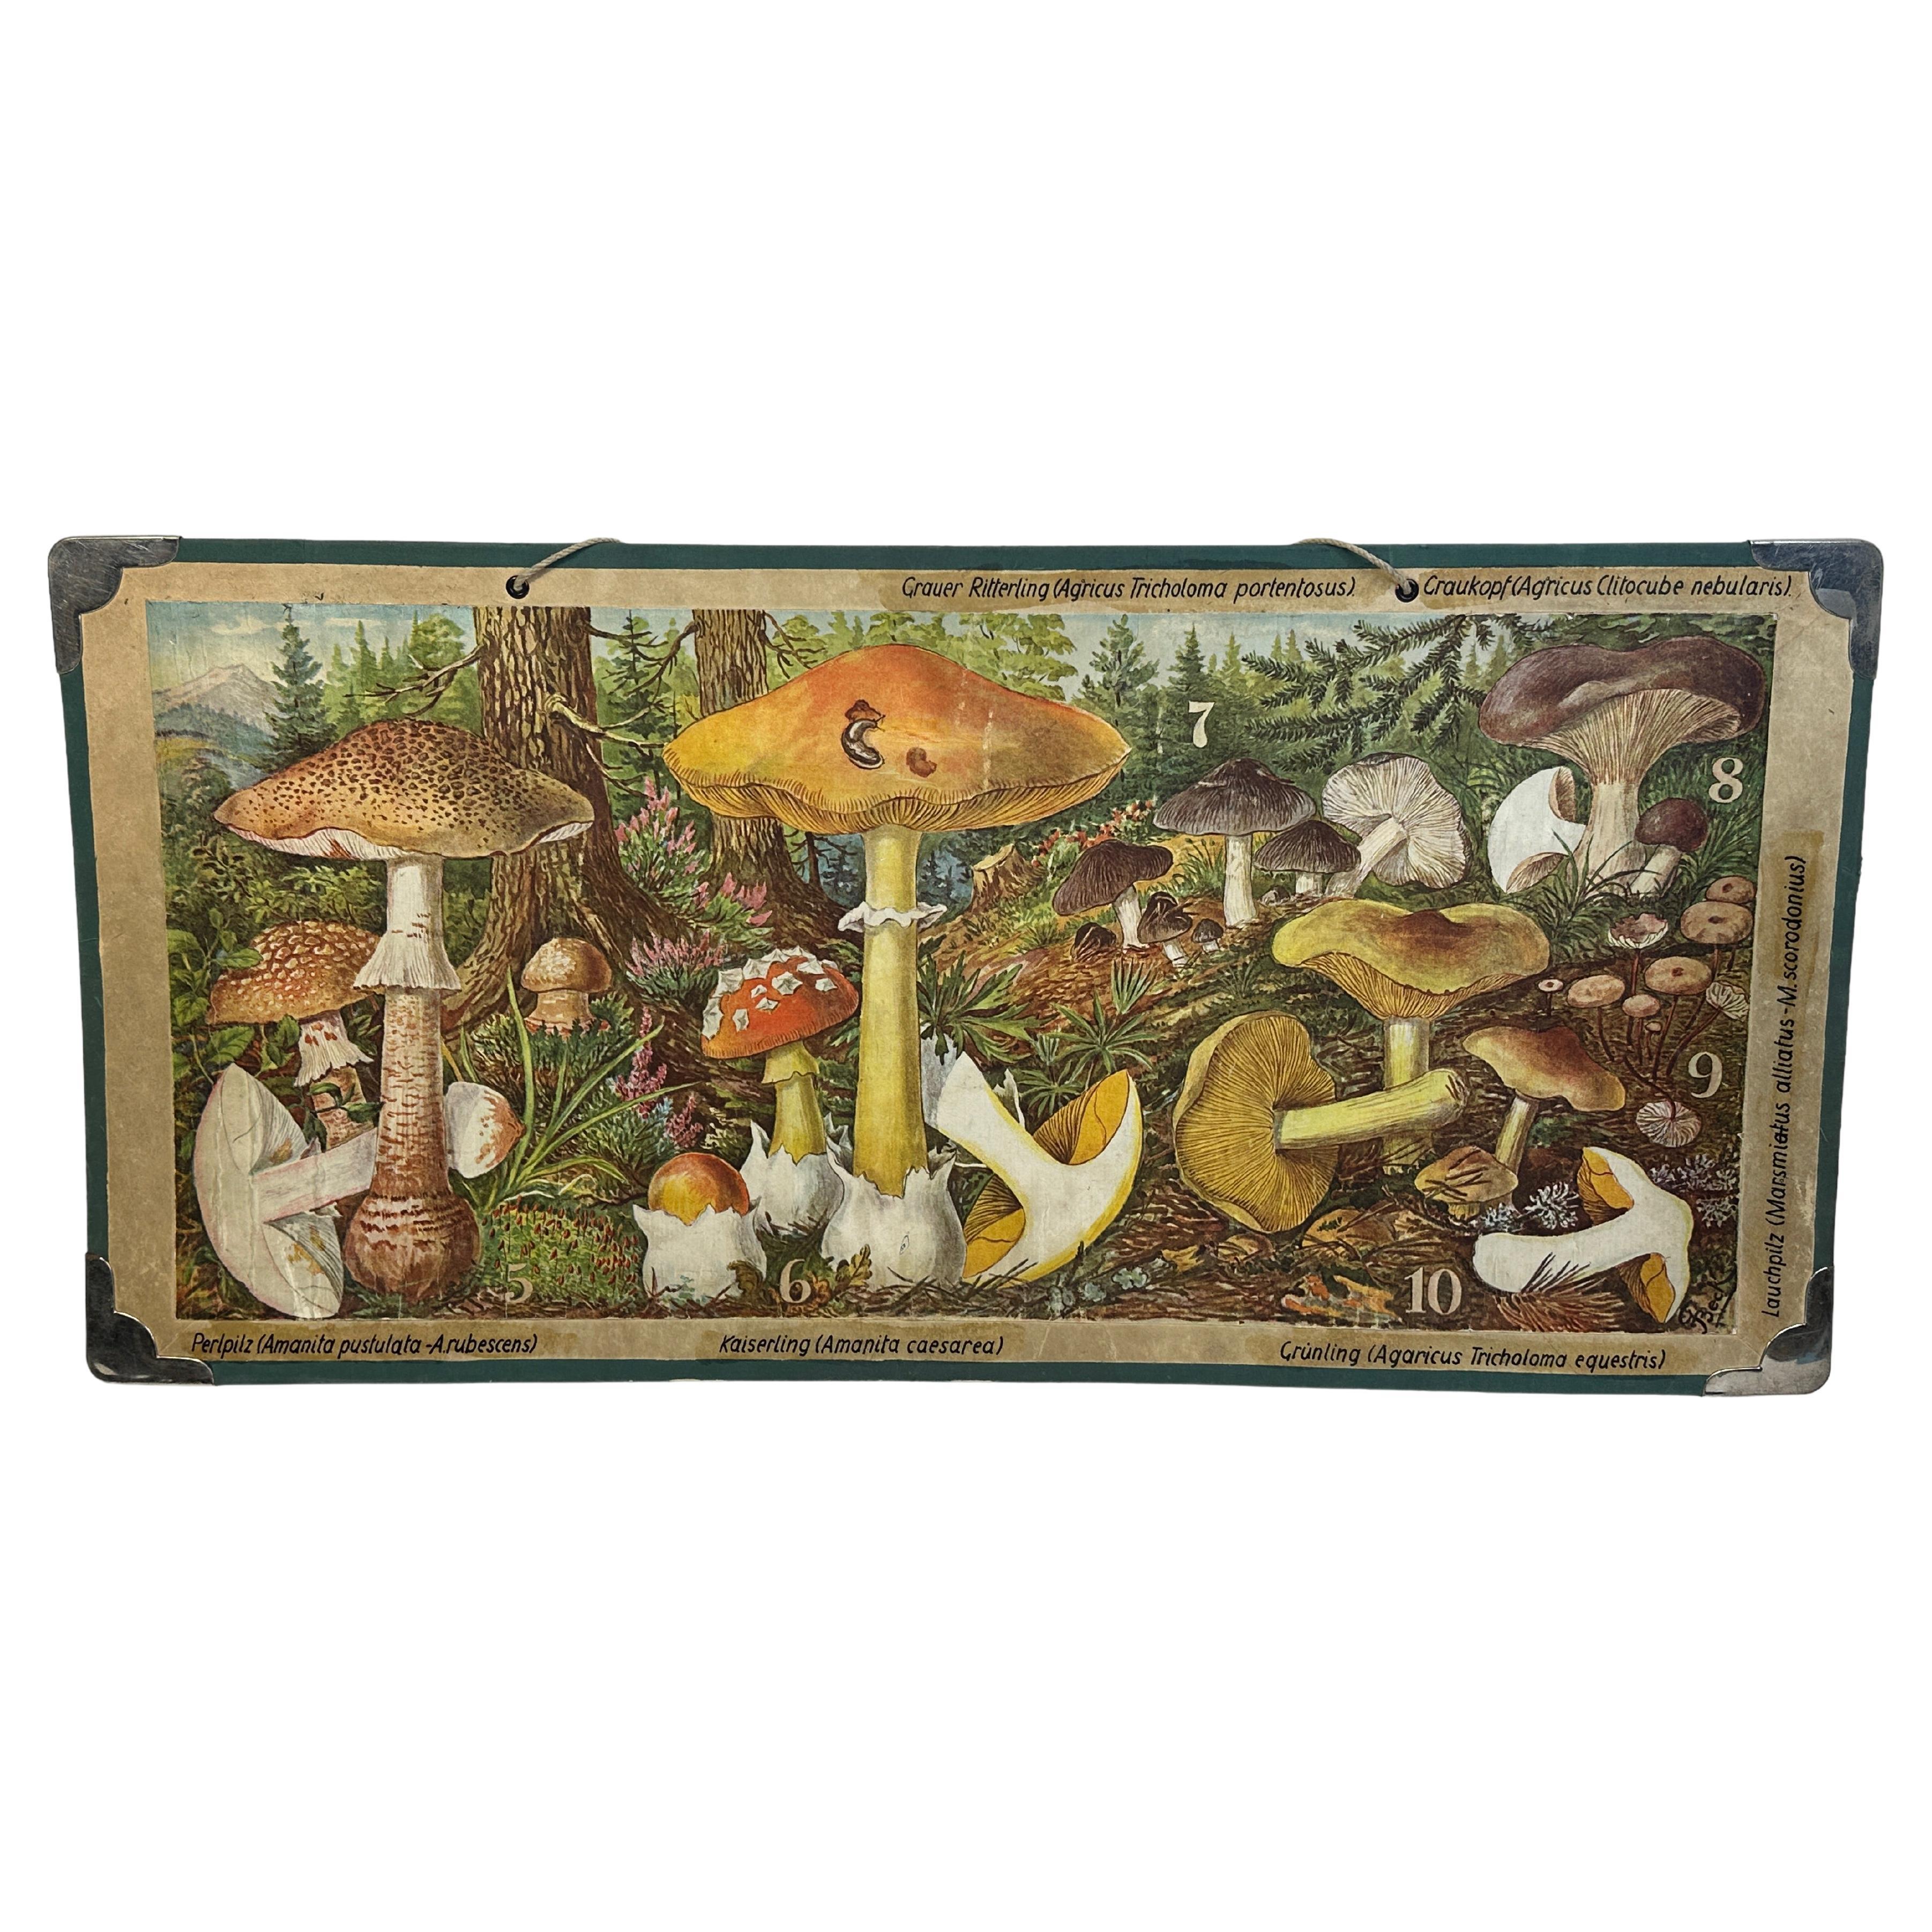 Mushrooms of Middle Europe Print Cardboard Wall Chart, Germany 1930s For Sale